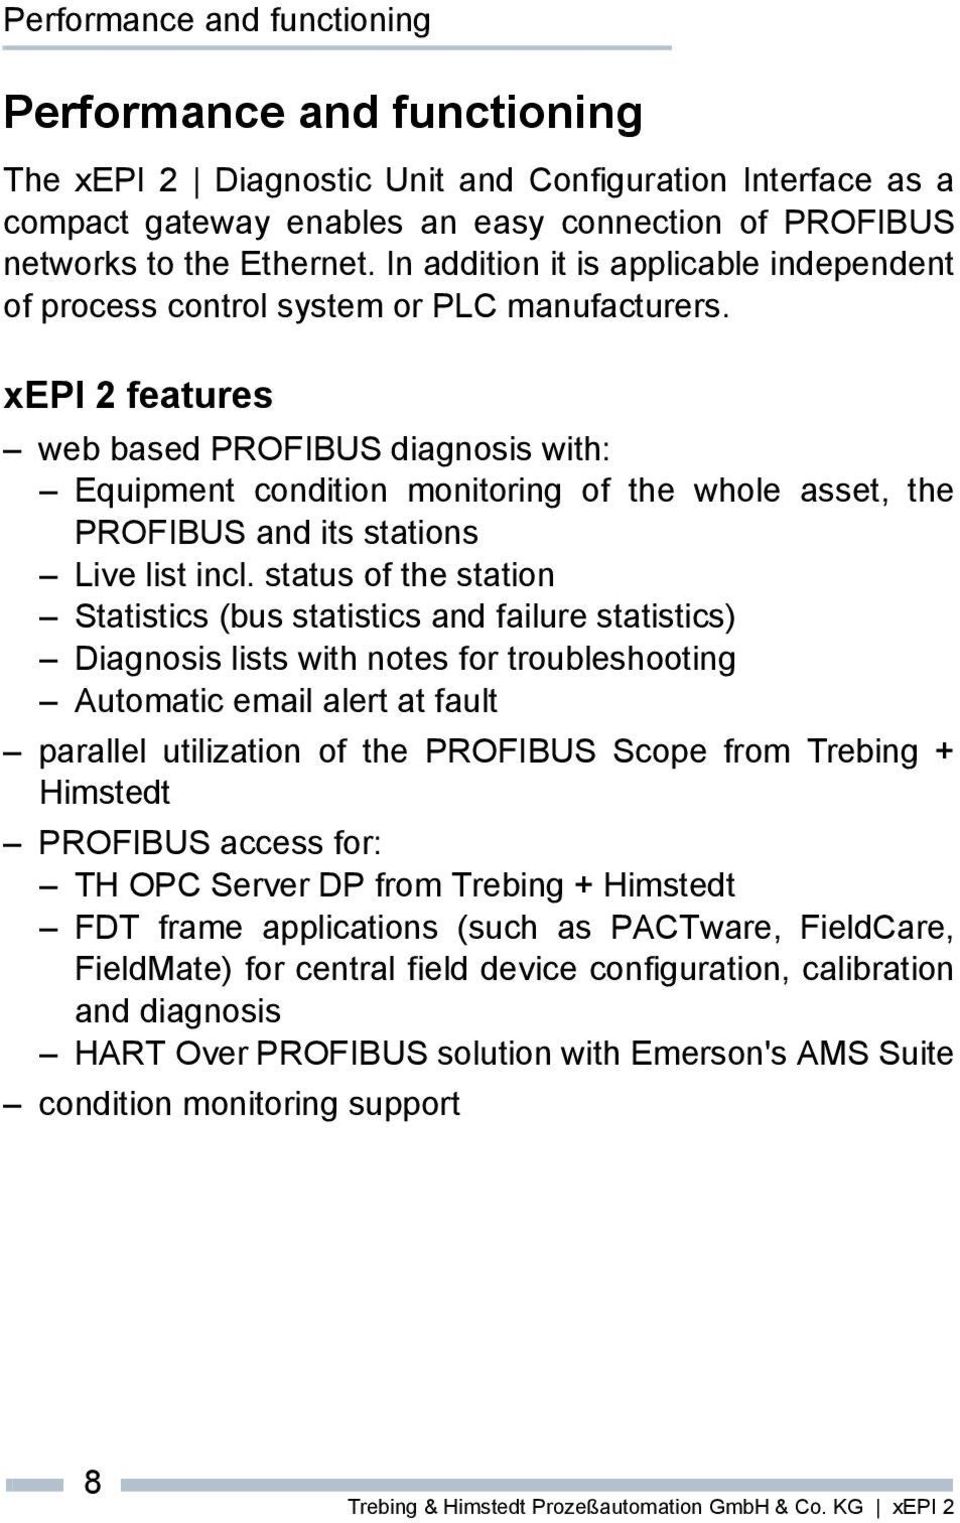 xepi 2 features web based PROFIBUS diagnosis with: Equipment condition monitoring of the whole asset, the PROFIBUS and its stations Live list incl.